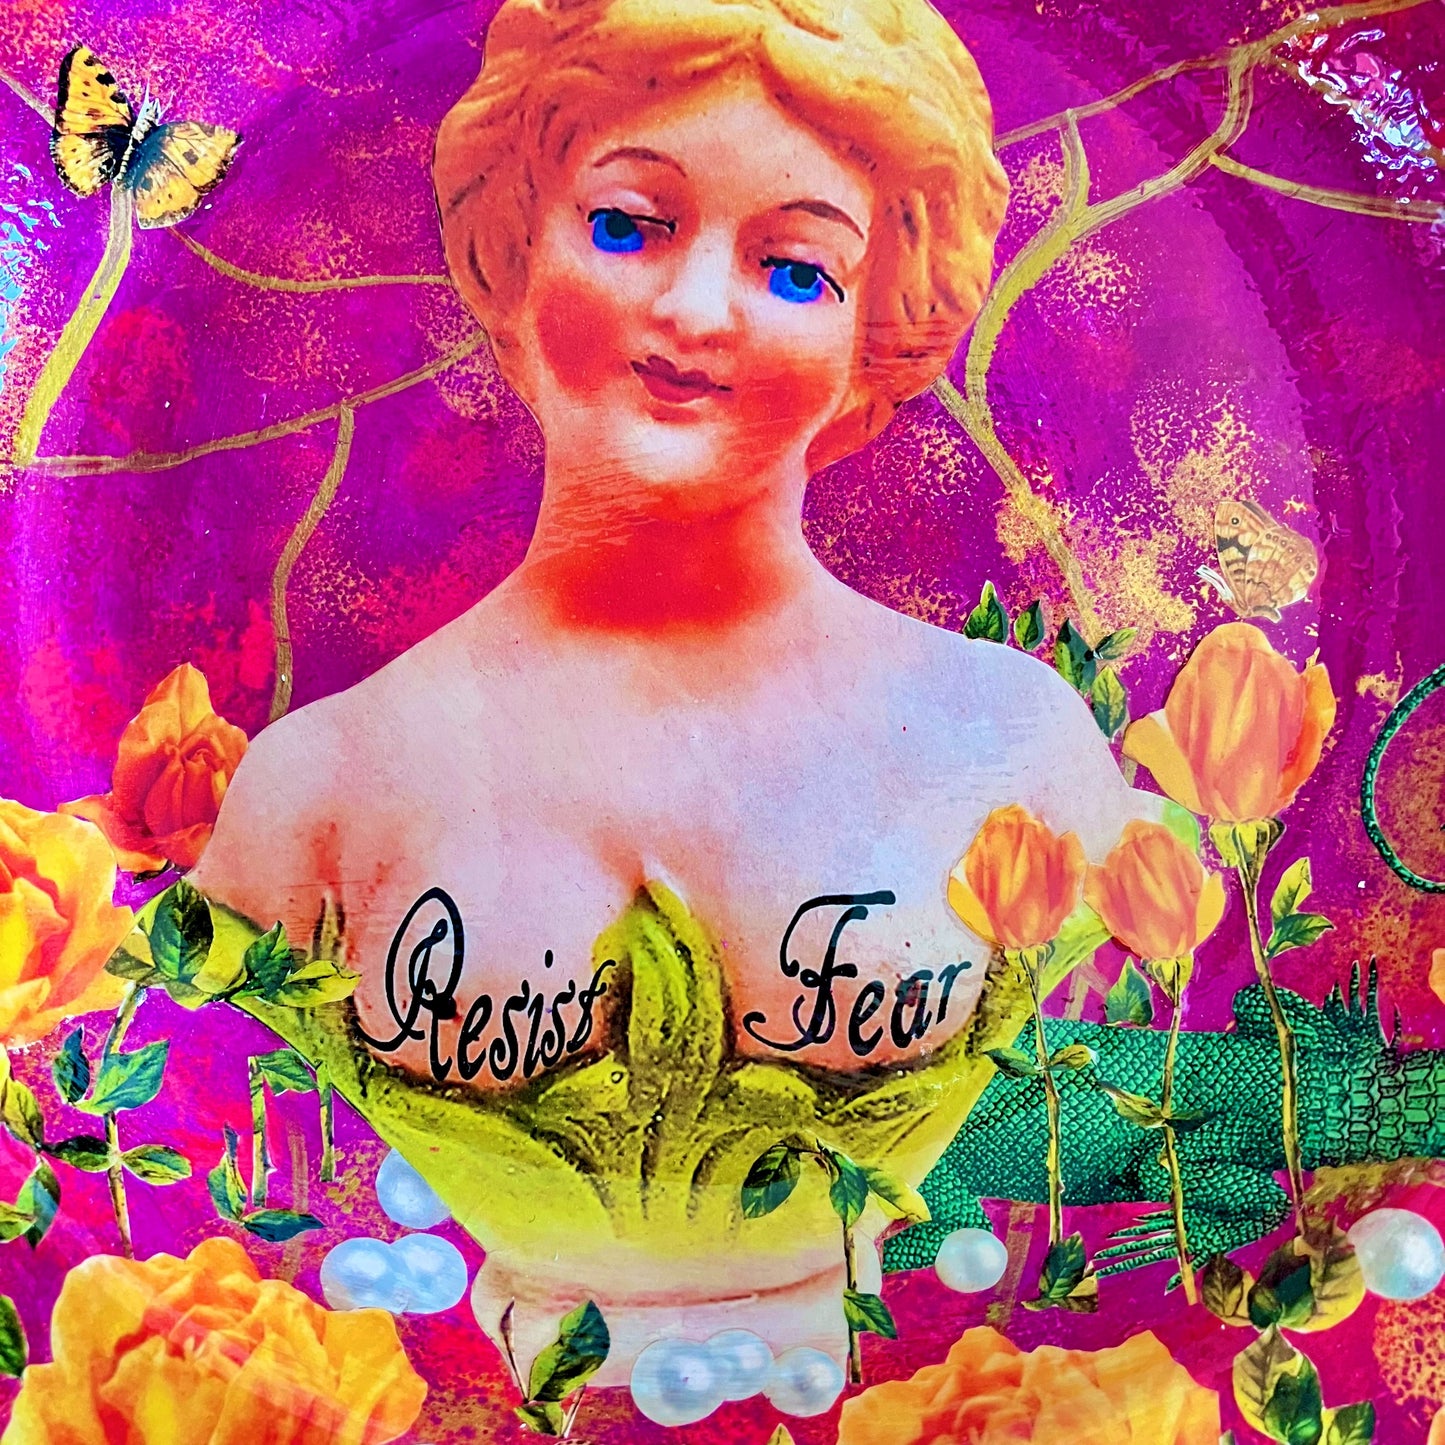 "Resist Fear" Wall Plate by House of Frisson, featuring a female bust statue with "Resist Fear" written across breasts, surrounded by flowers, and pearls, on a purple background. Closeup detail showing female statue against a purple background.